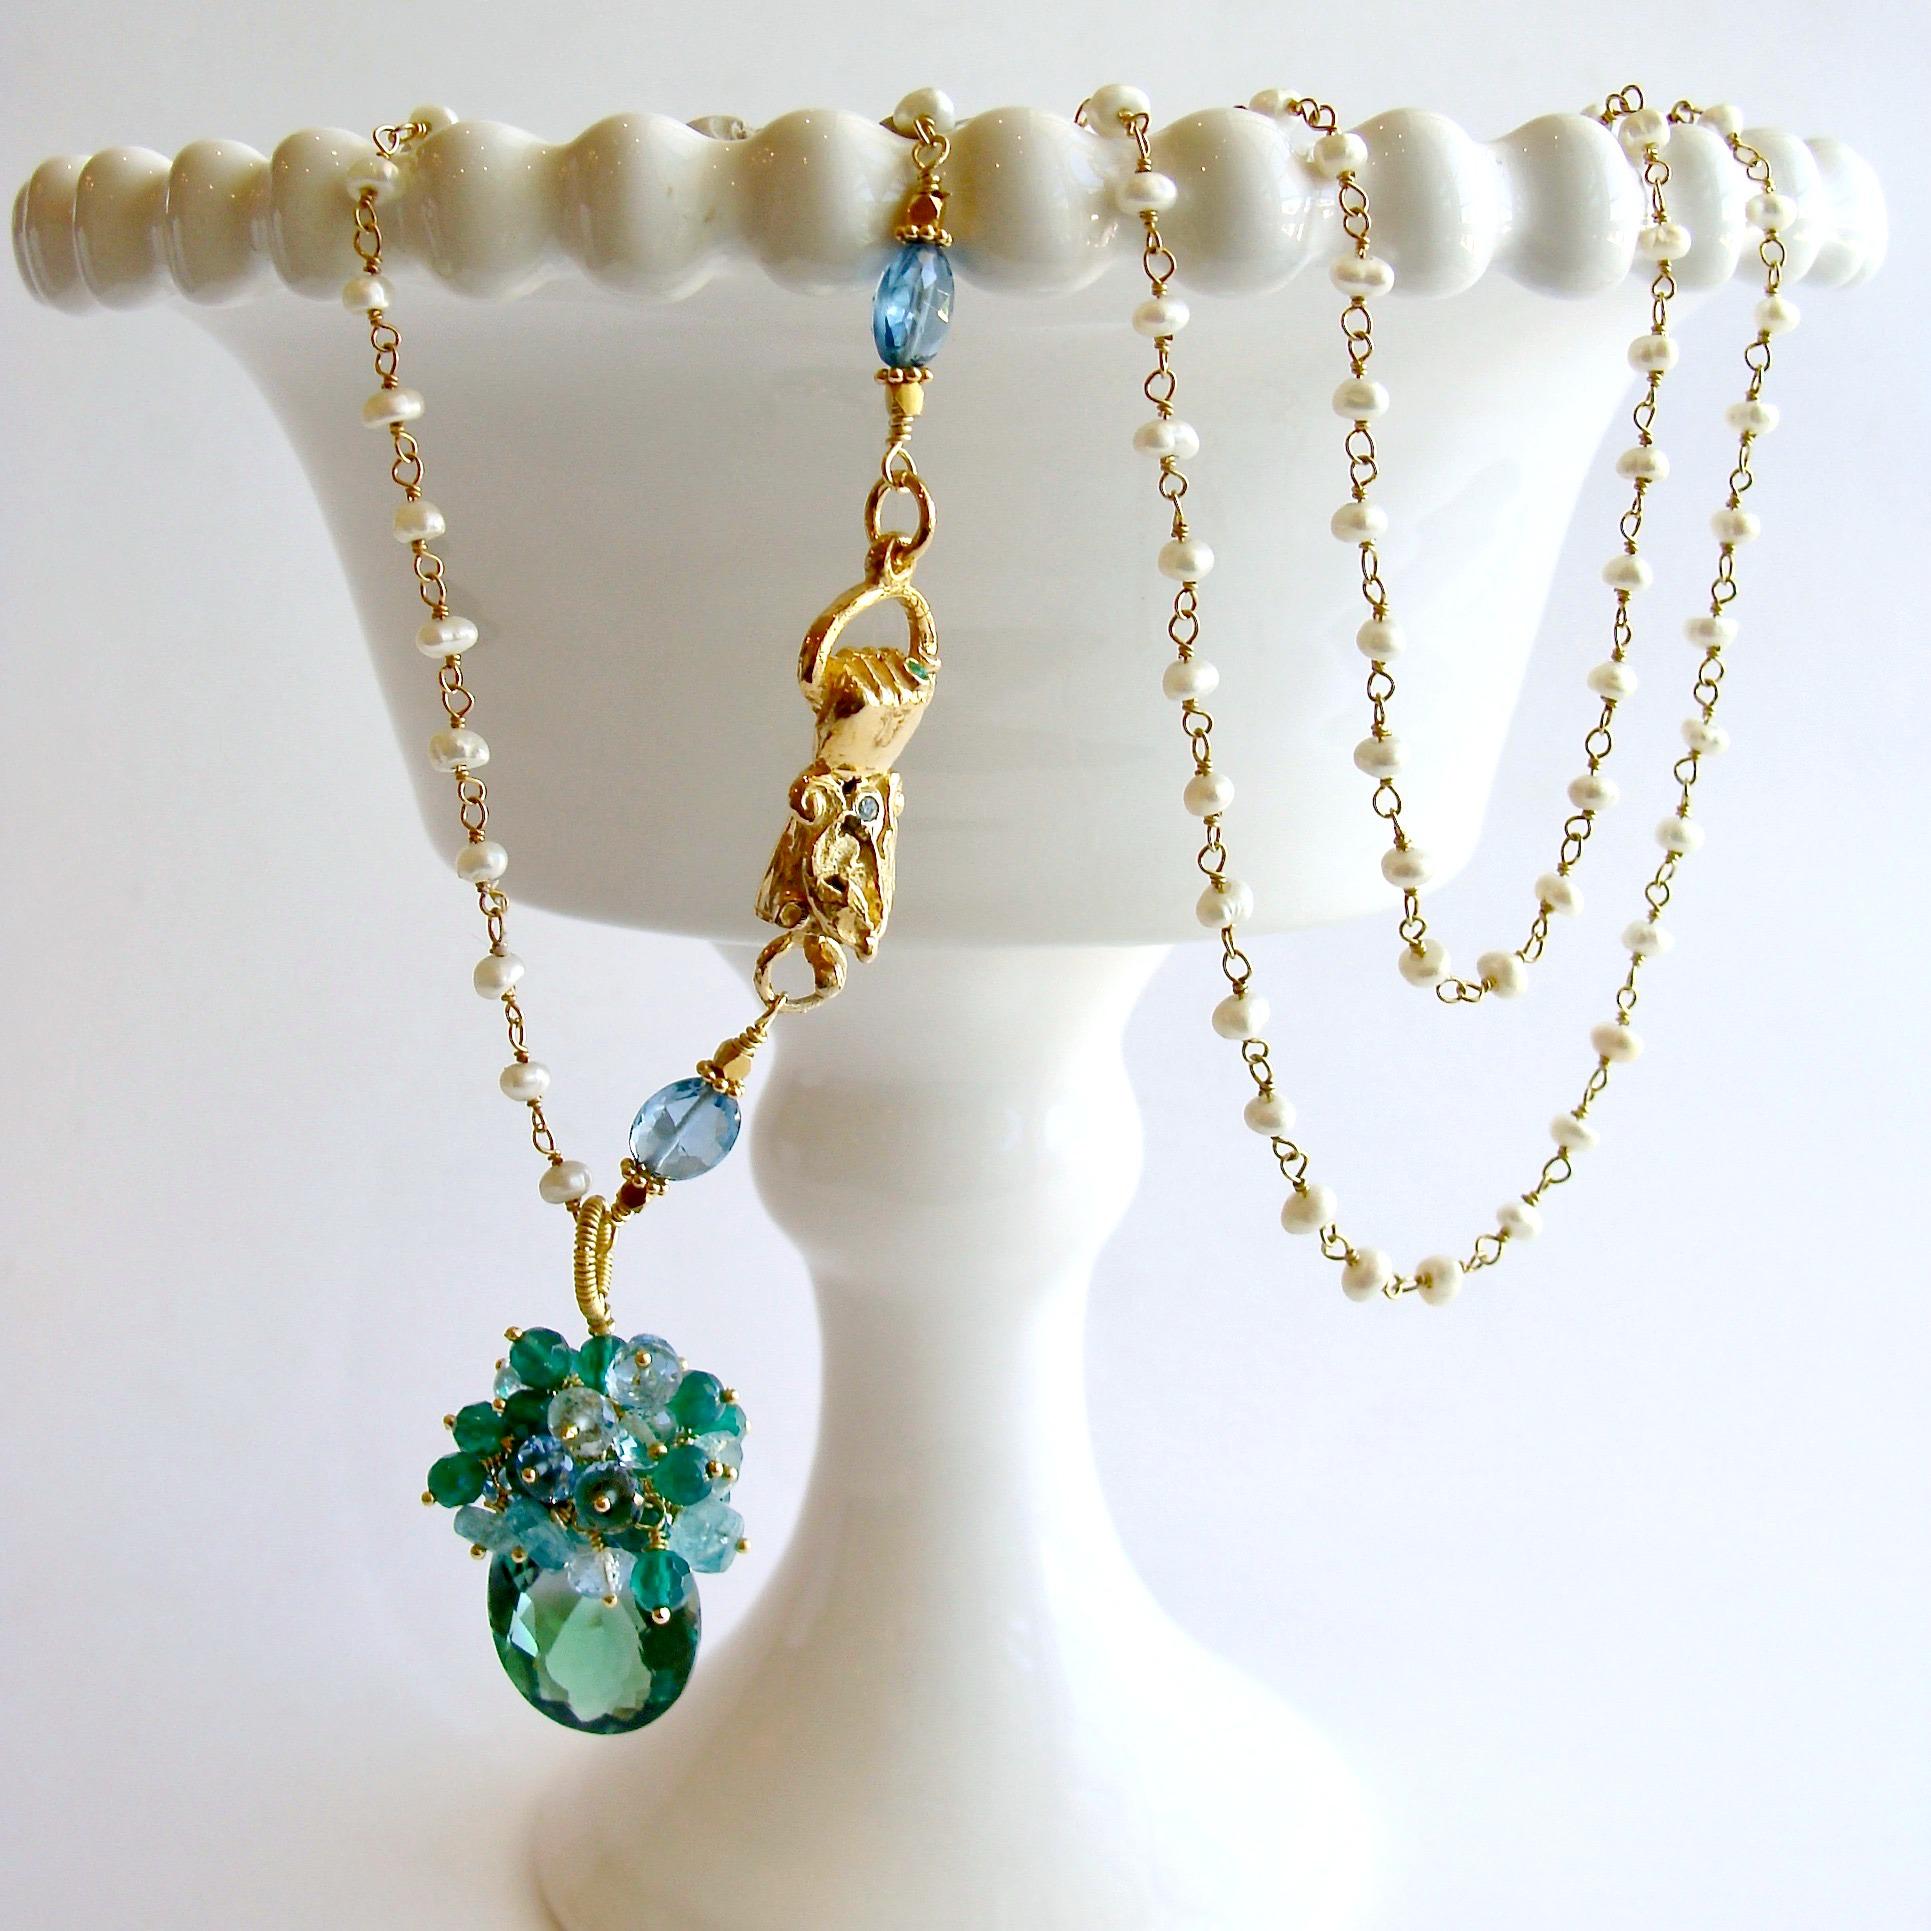 Bella Cluster Necklace.

A gorgeous blue green oval bi-color Bolivian ametrine has been crowned with a riotous frill of coordinating colors, ending with a hand coiled loop.  Sparkling London blue topaz, sky blue topaz, apatite and green onyx